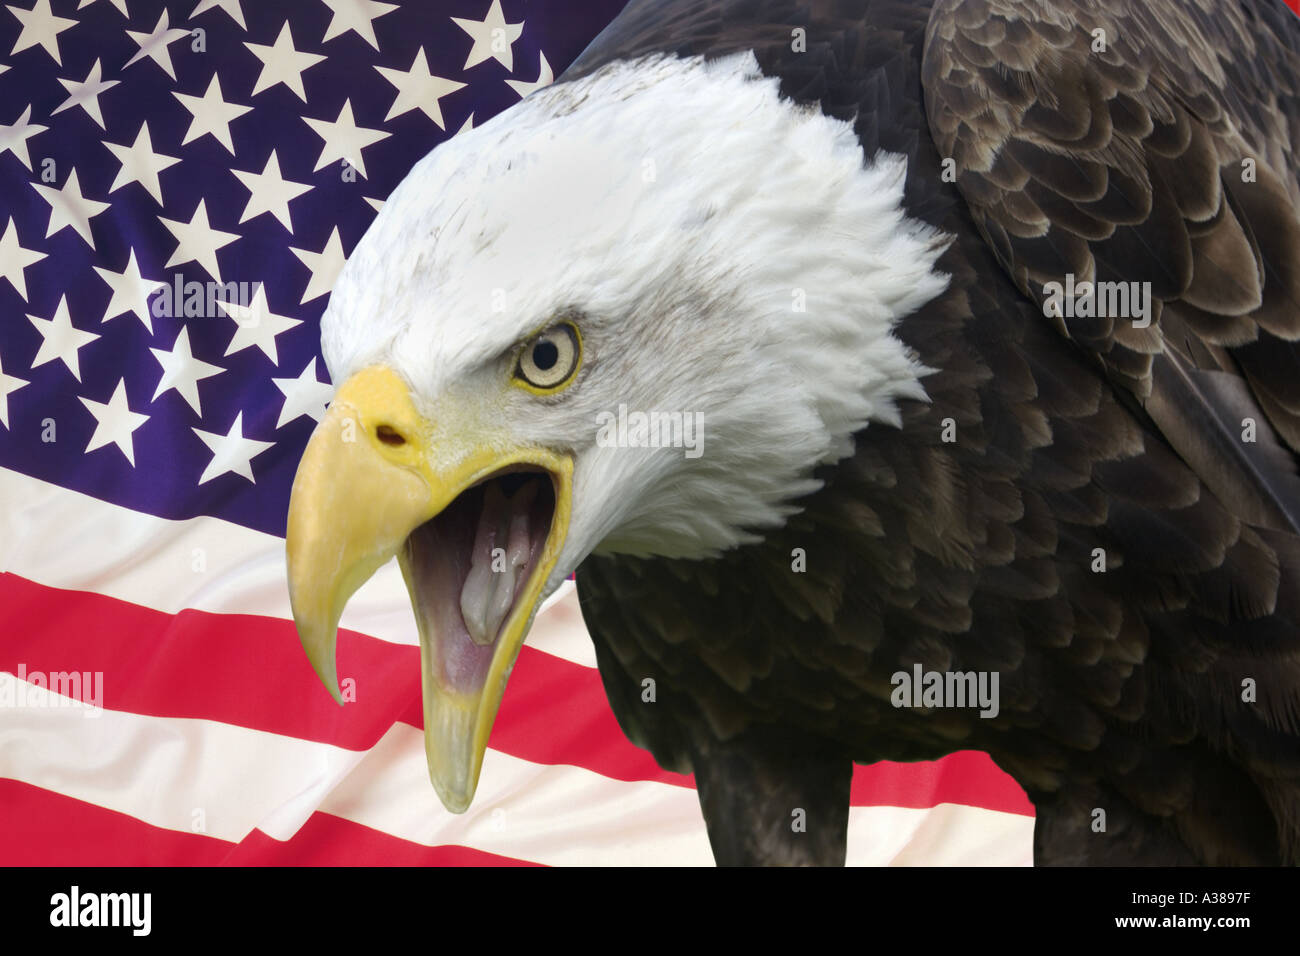 North American Bald Eagle and the flag of the United States of America Stock Photo